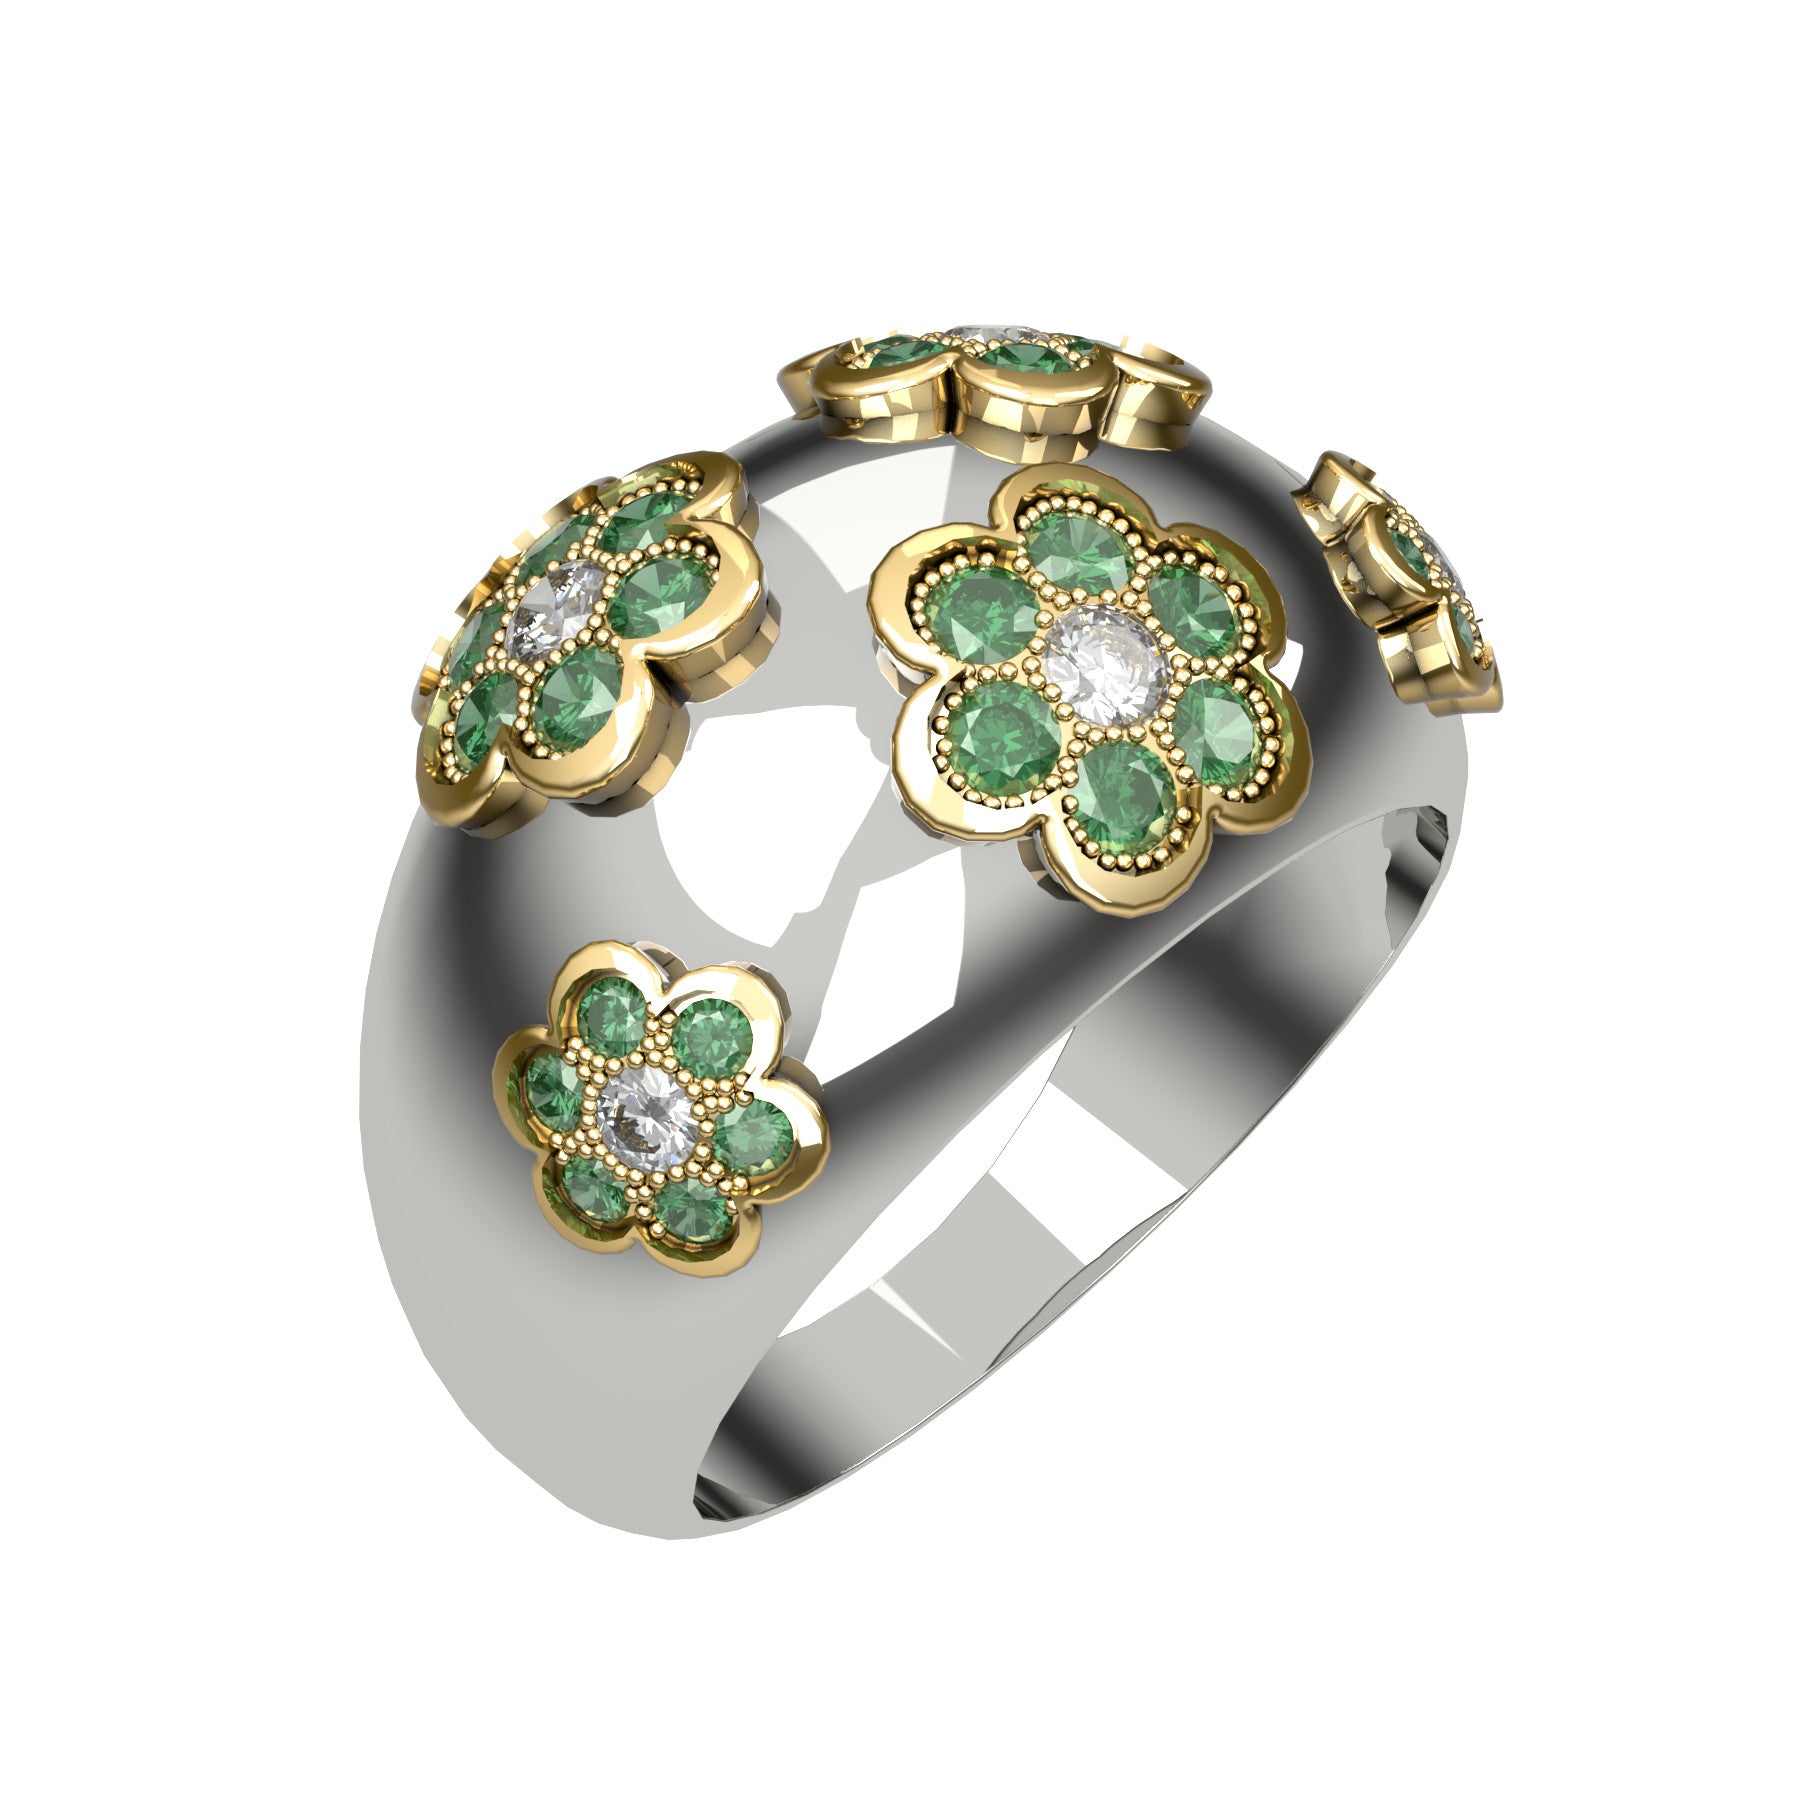 Blooming band ring, natural round diamonds, natural round emeralds, 18 k yellow and white gold, weight about 7,50 g (0.26 oz), width 12 mm max